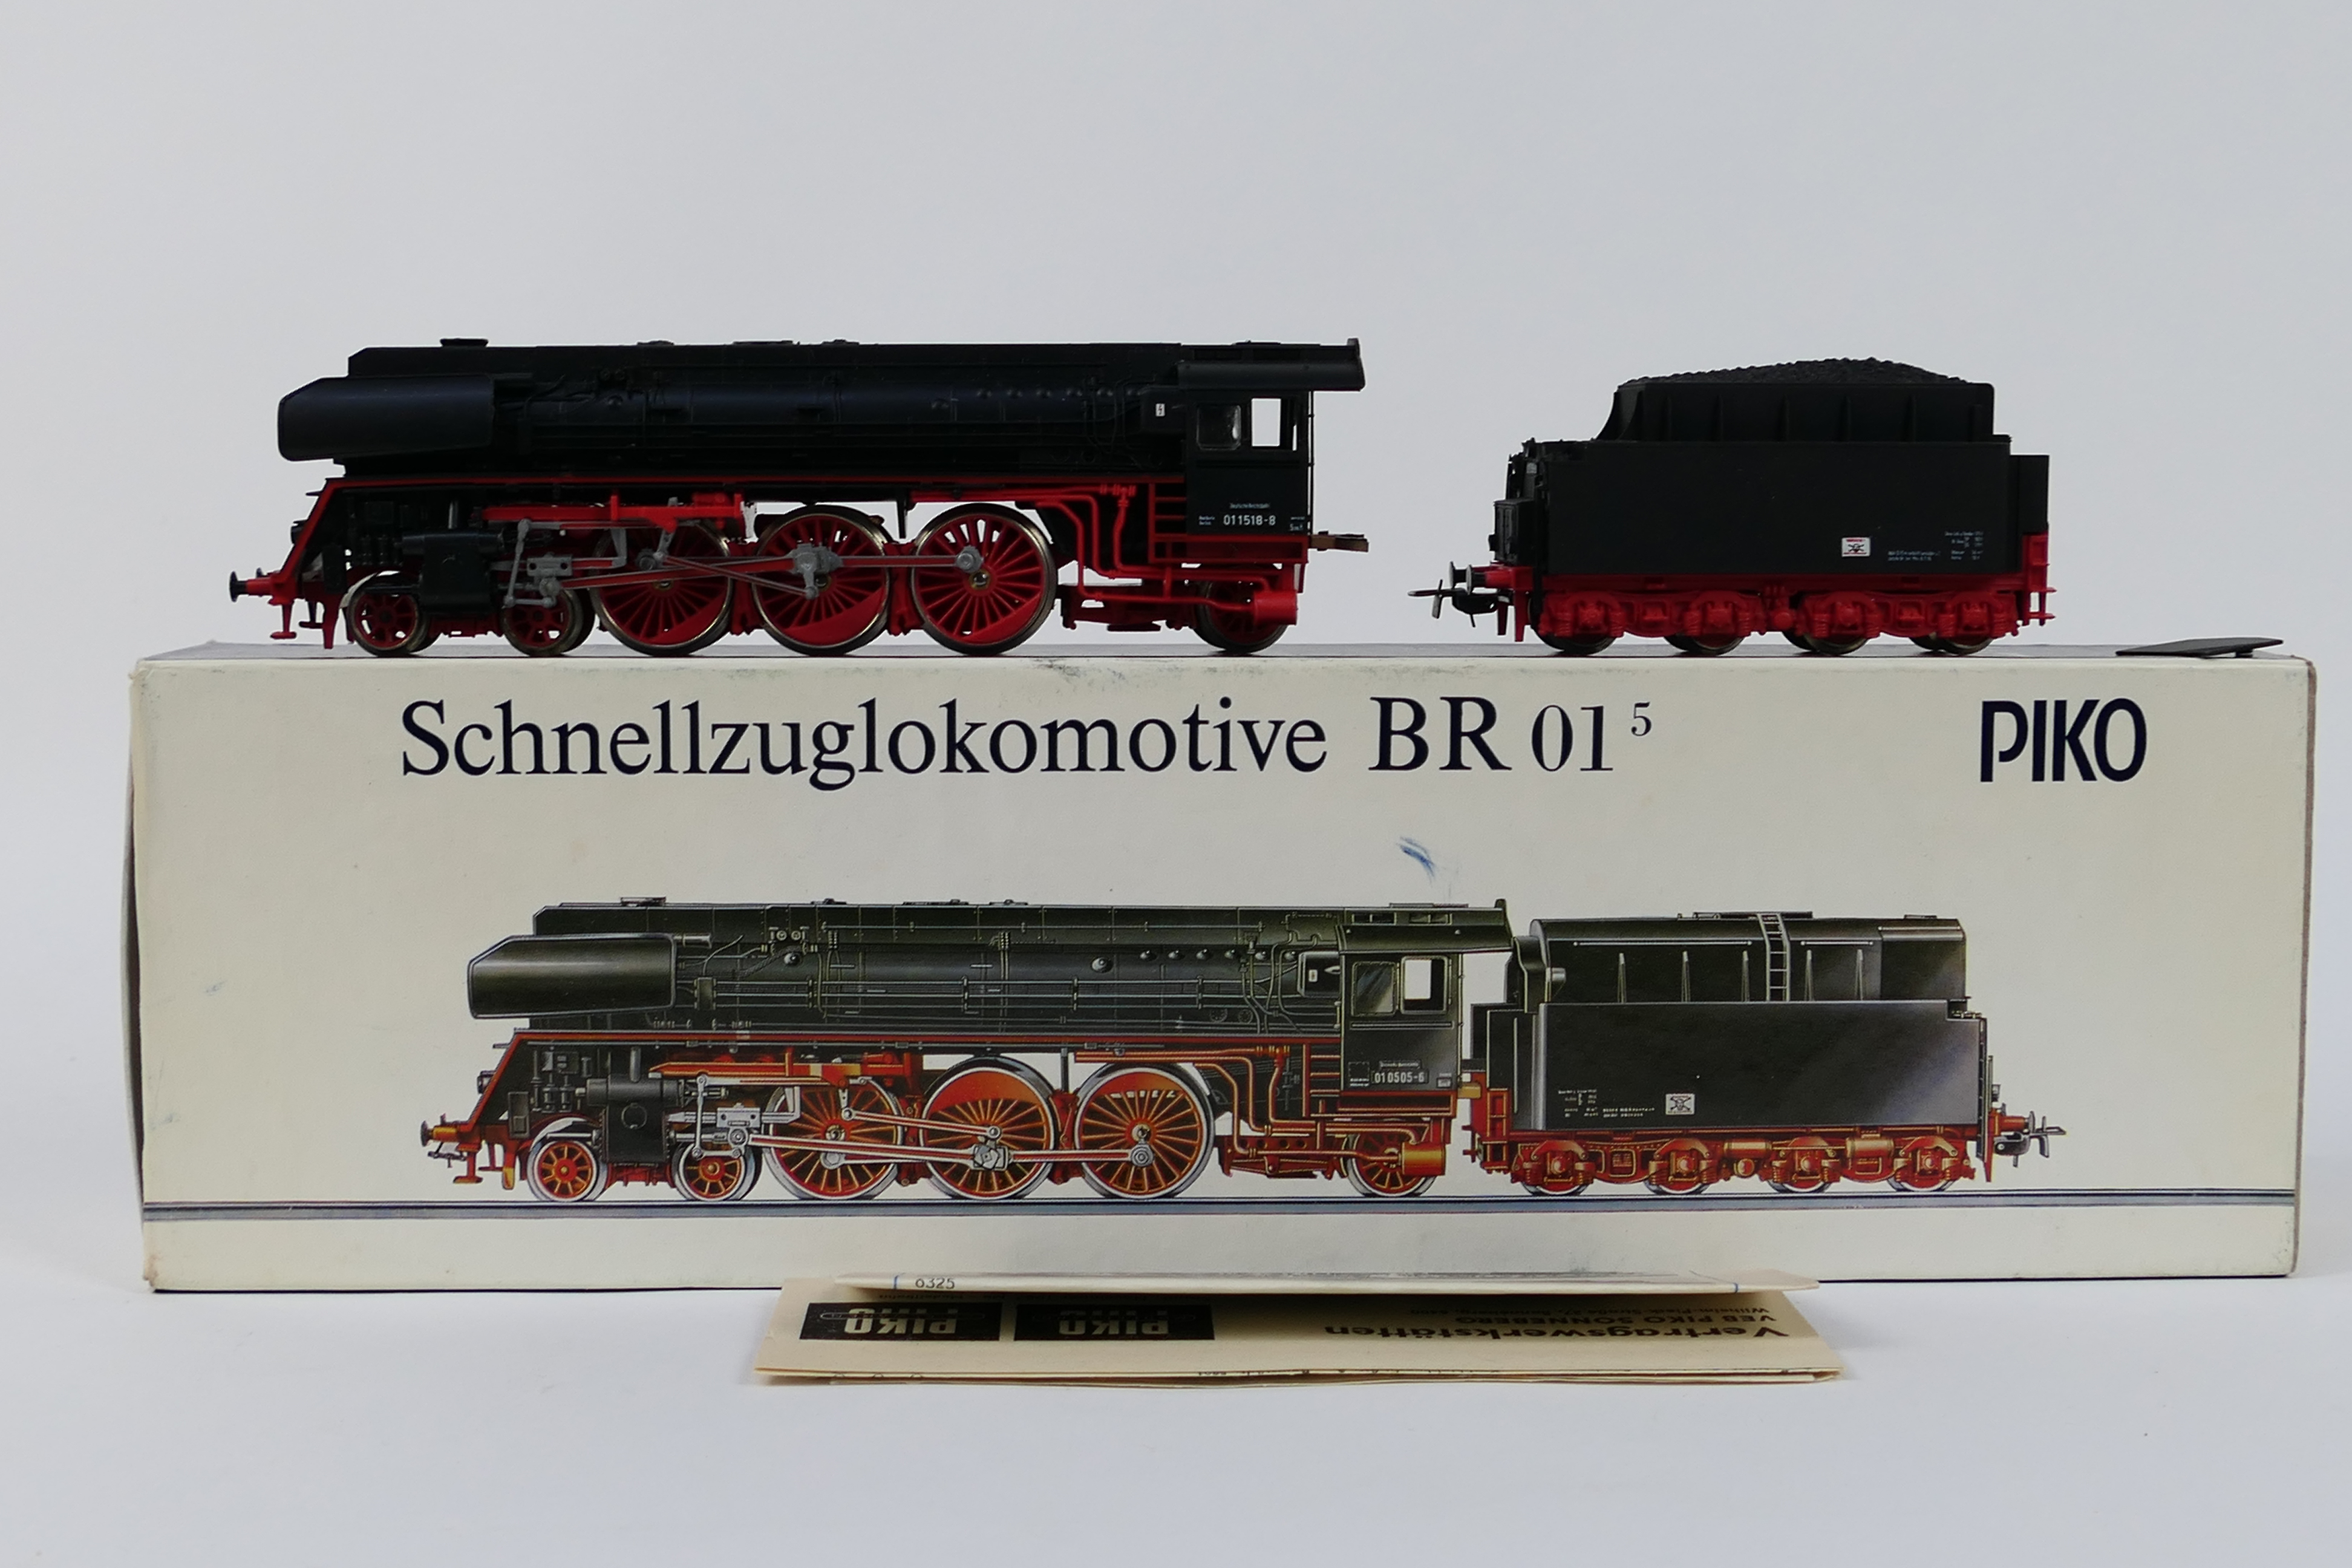 Piko - A boxed Piko #5/6325 BR01 4-6-2 HO gauge steam locomotive and tender.